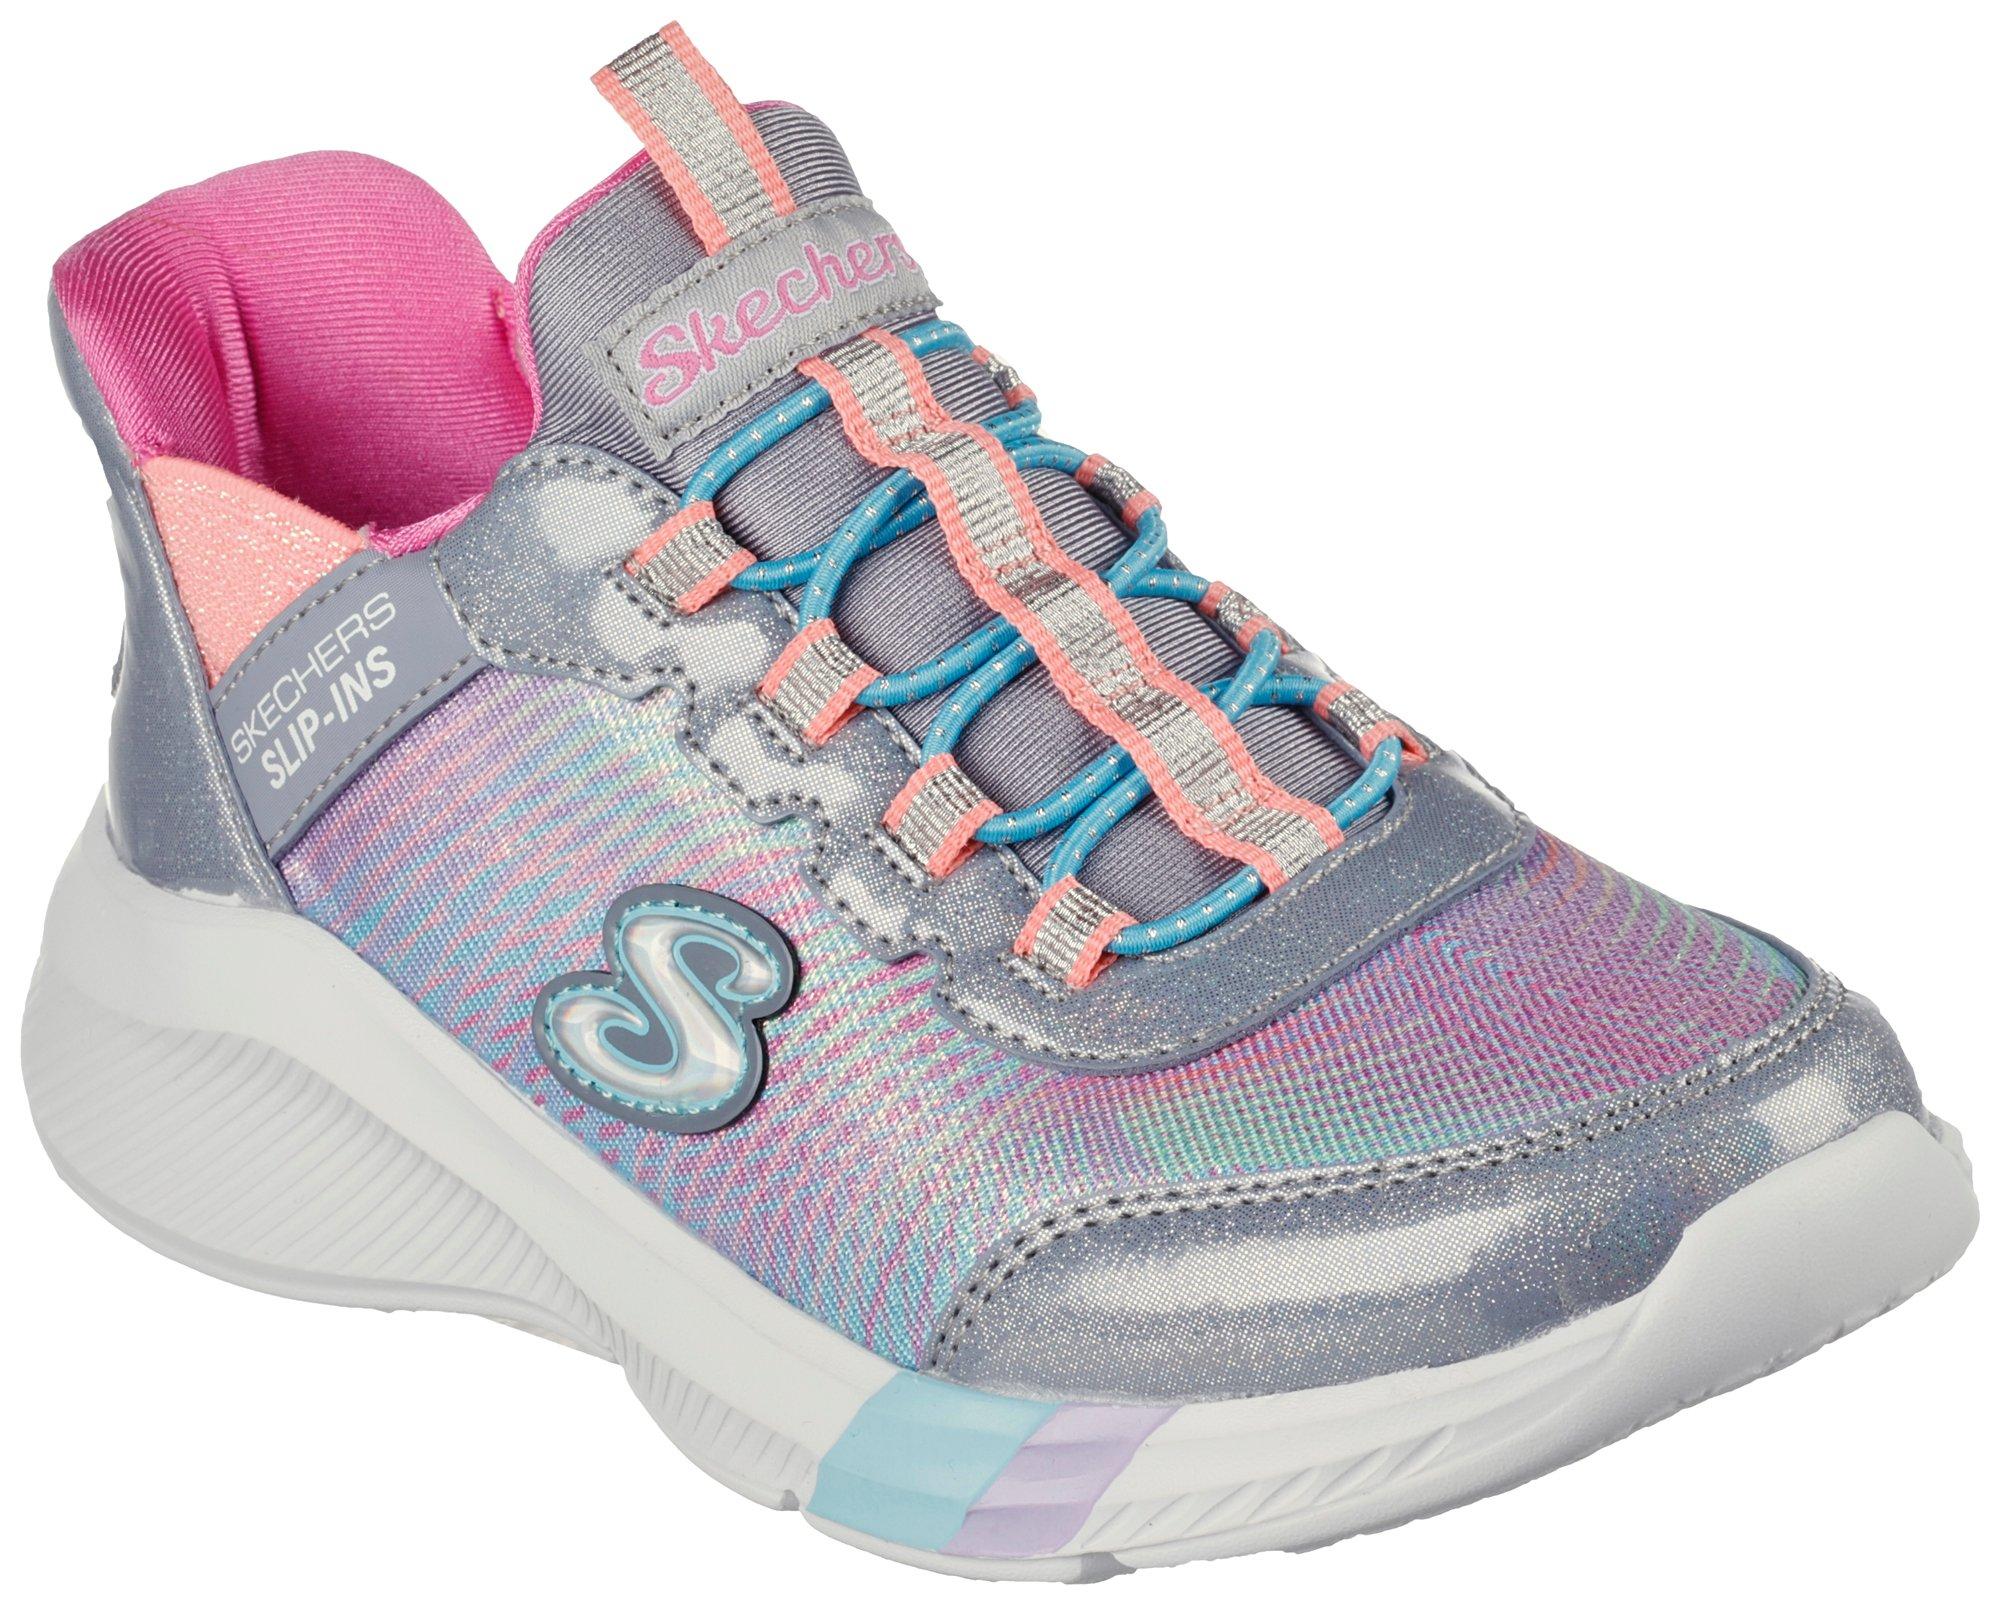 Girls Slip-ins Dreamy Lites Colorful Prism Shoes